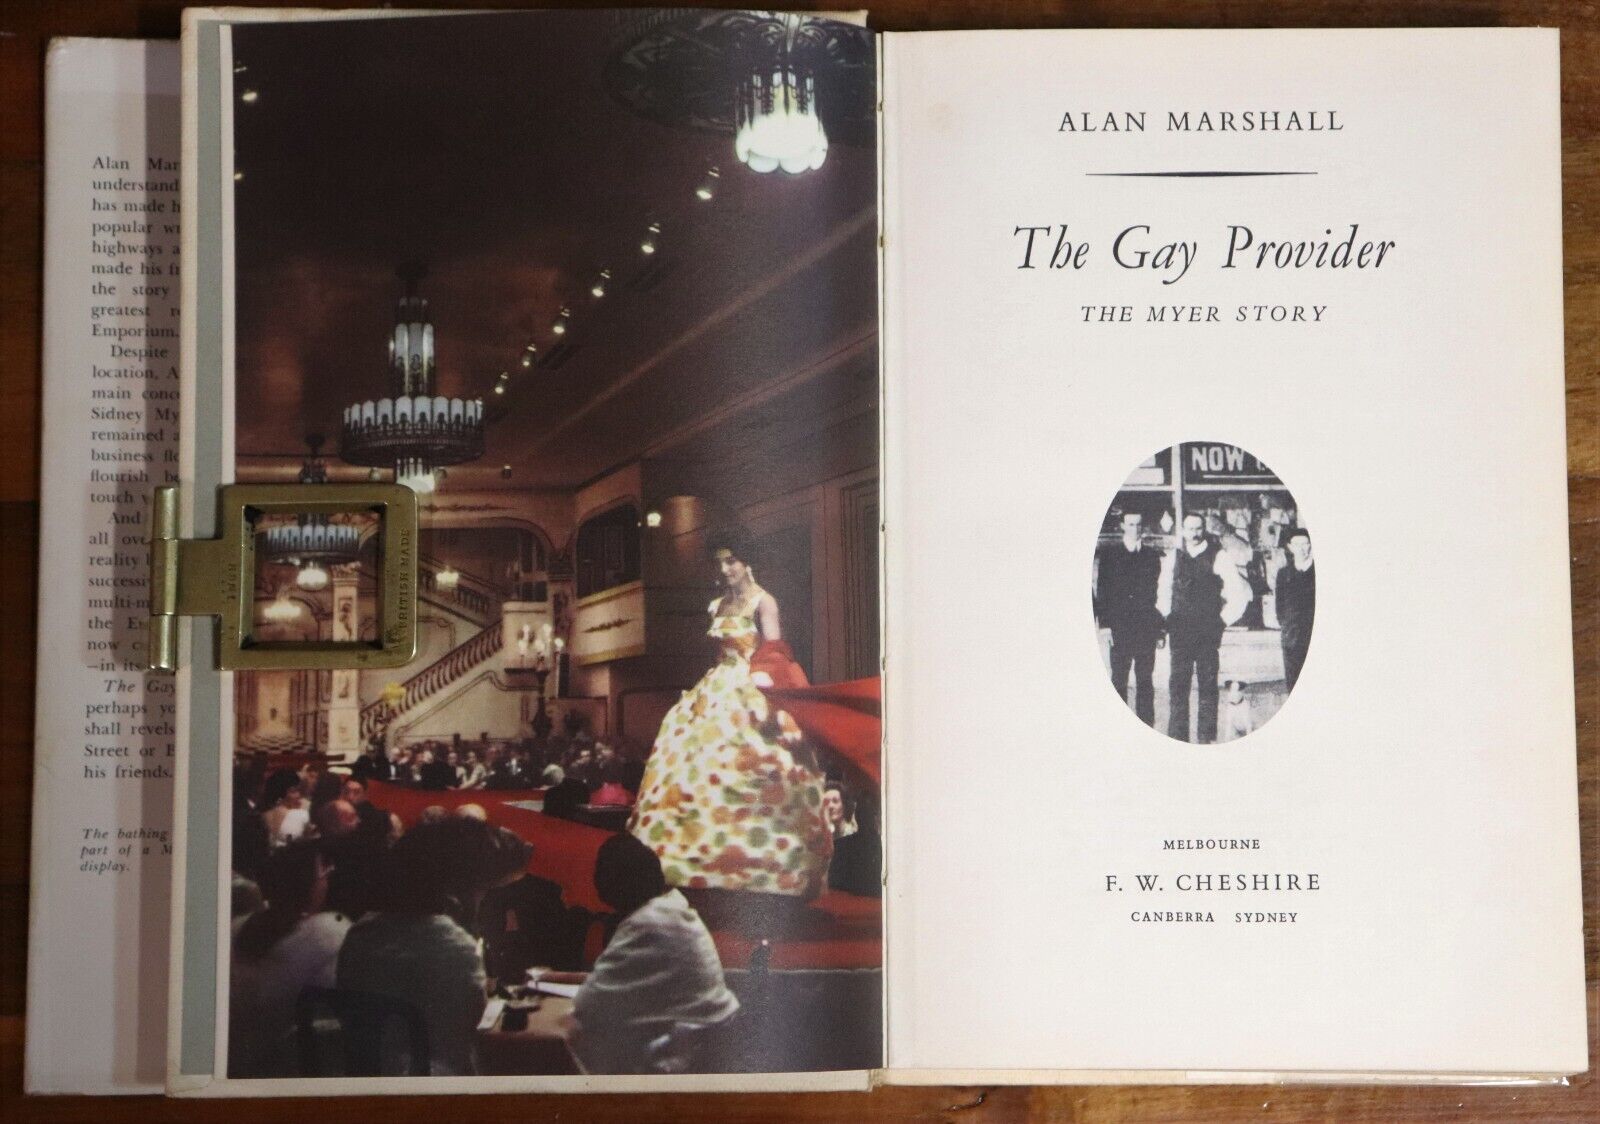 The Gay Provider: The Myer Story - 1961 - 1st Ed. Australian Retail History Book